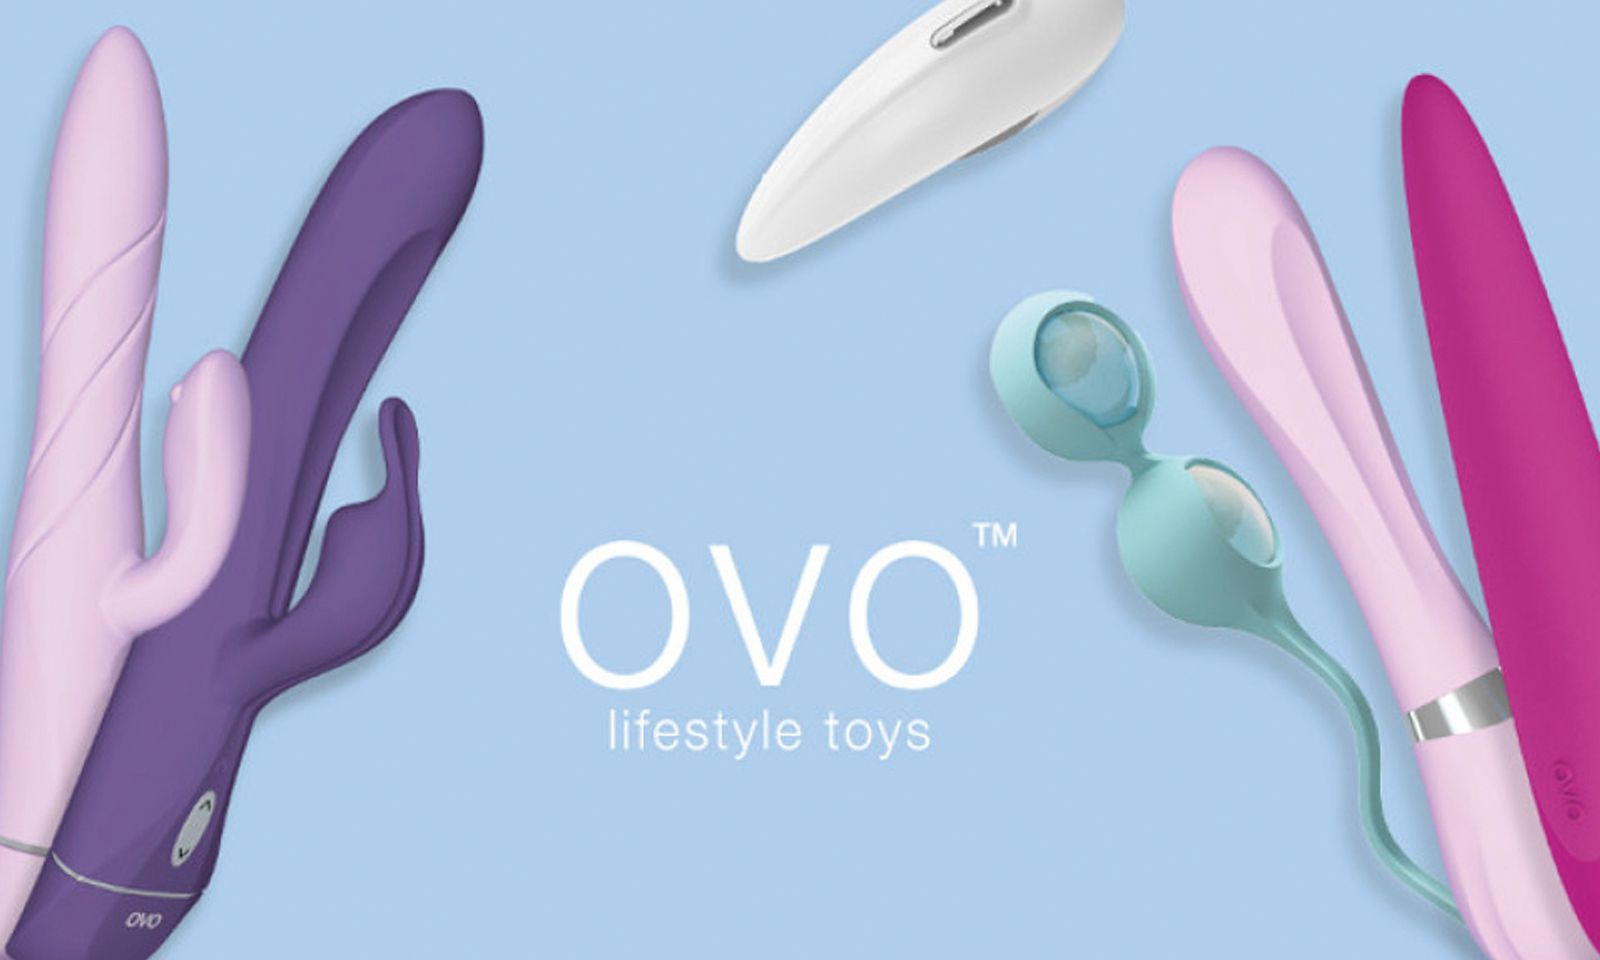 Ovo Lifestyle Toys To Debut New Ranges at ANME